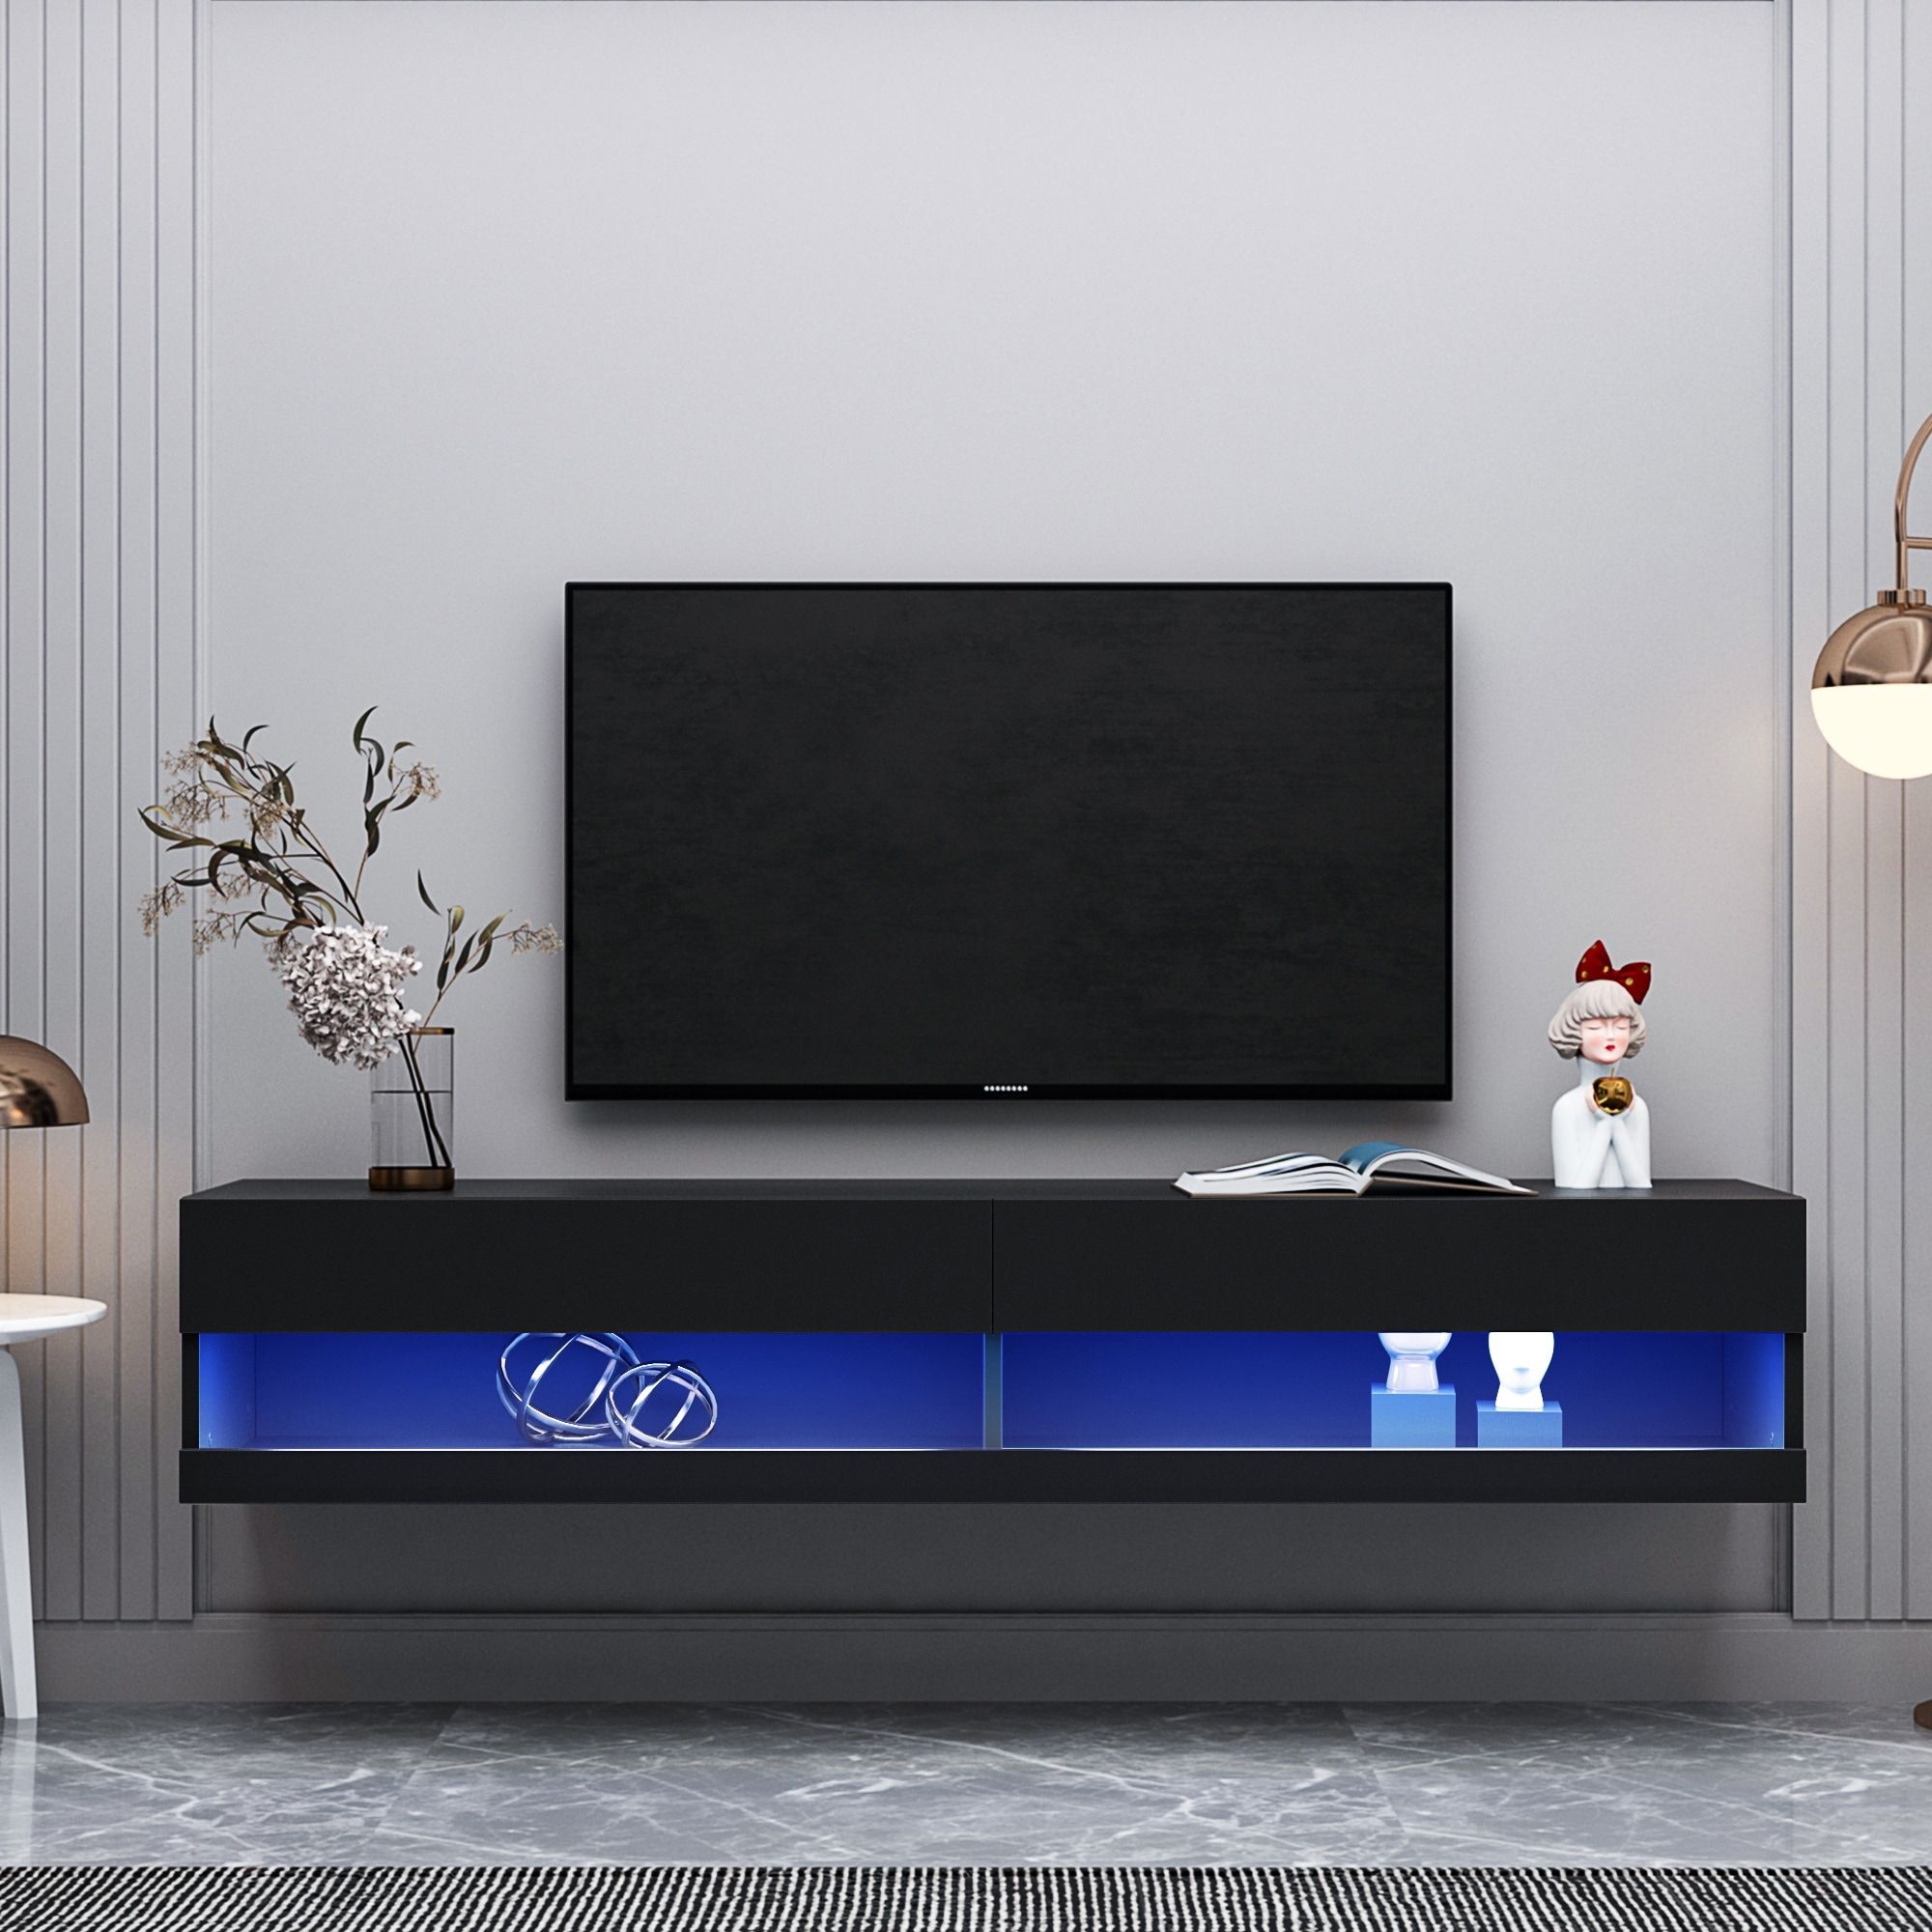 Wall Mounted Floating Tv Stand With Led Lights And Storage Compartments –  Bed Bath & Beyond – 38286386 Throughout Wall Mounted Floating Tv Stands (View 10 of 15)